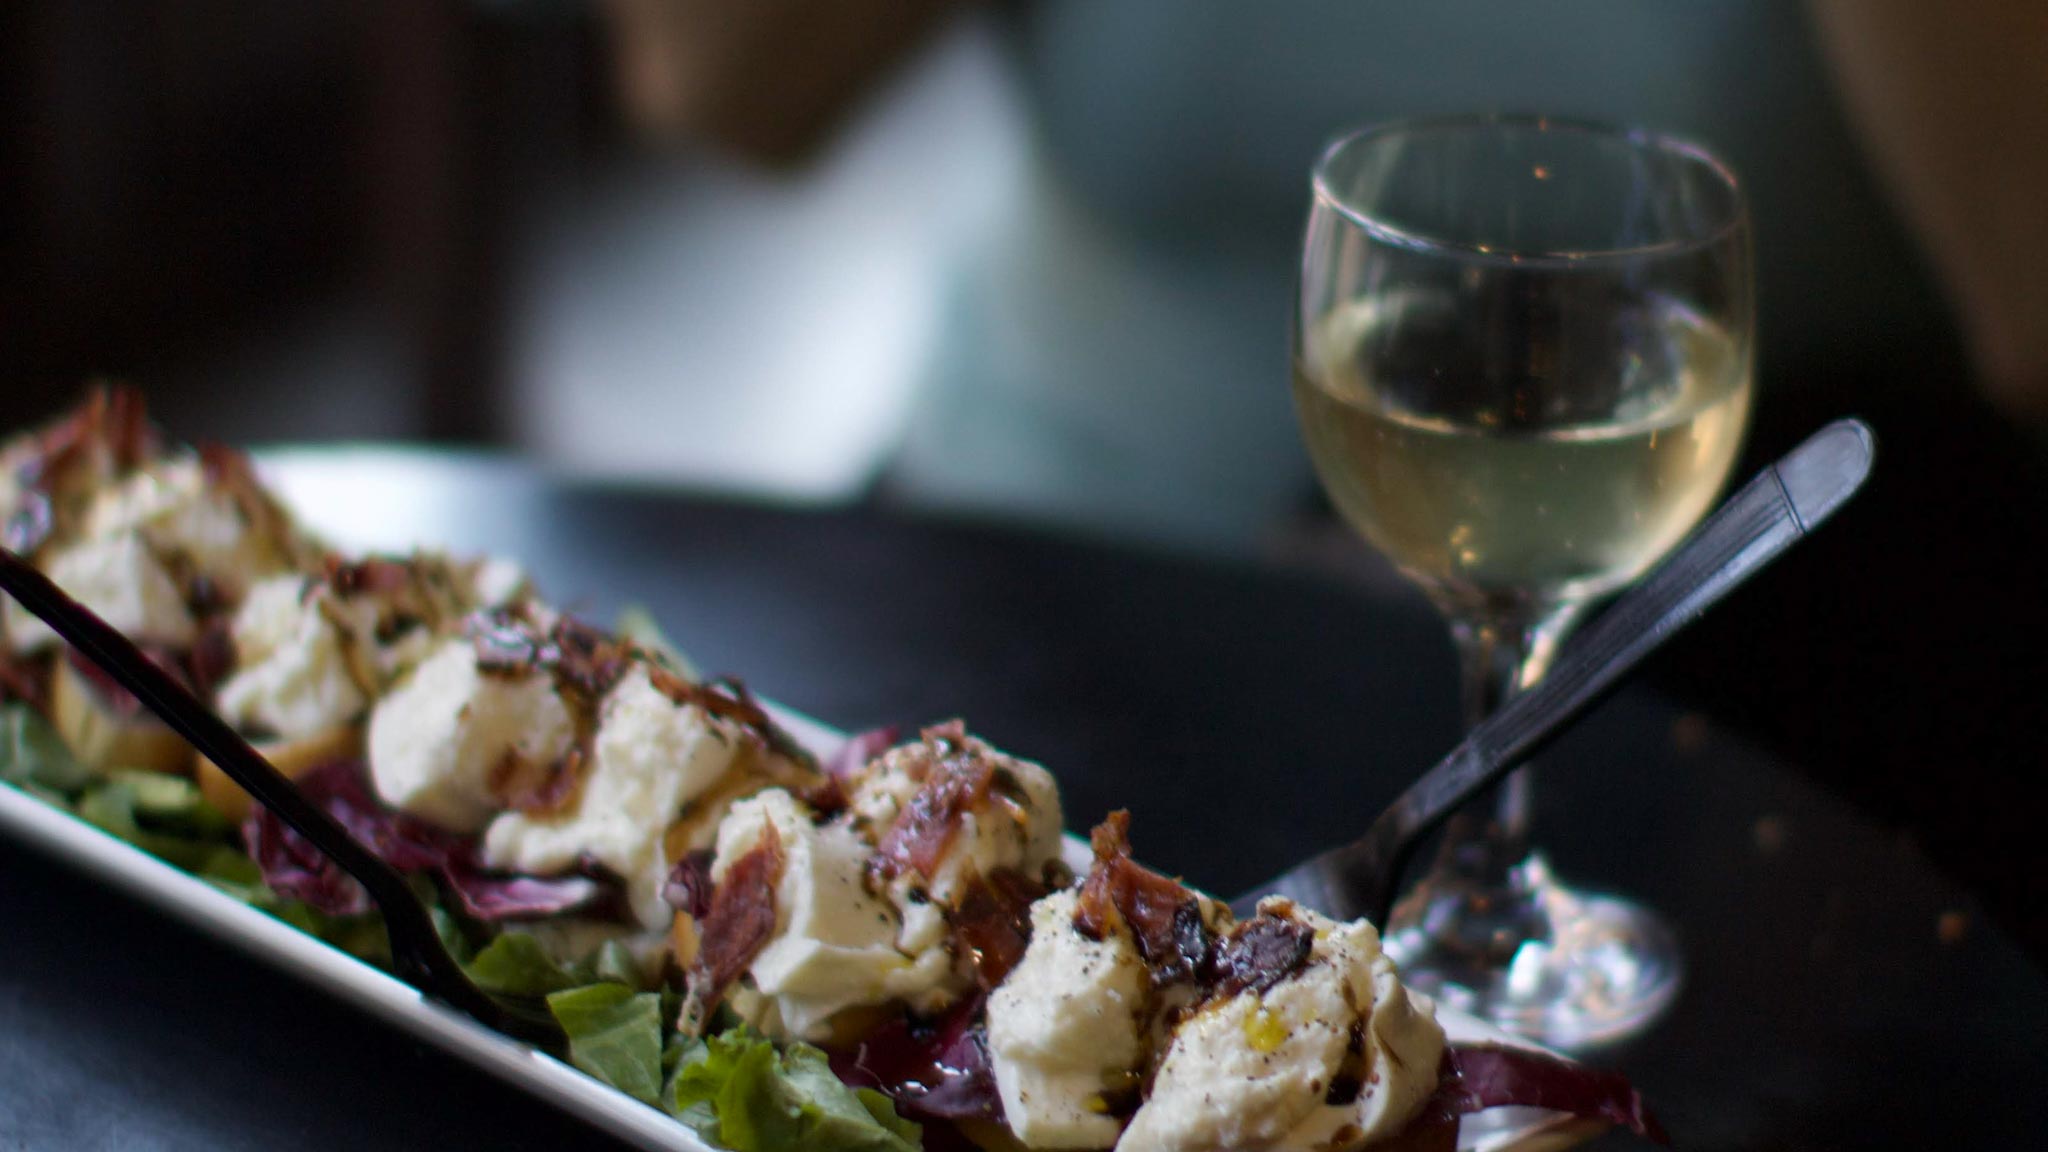 WINE AND FOOD COMBINATIONS YOU HAVE TO TRY